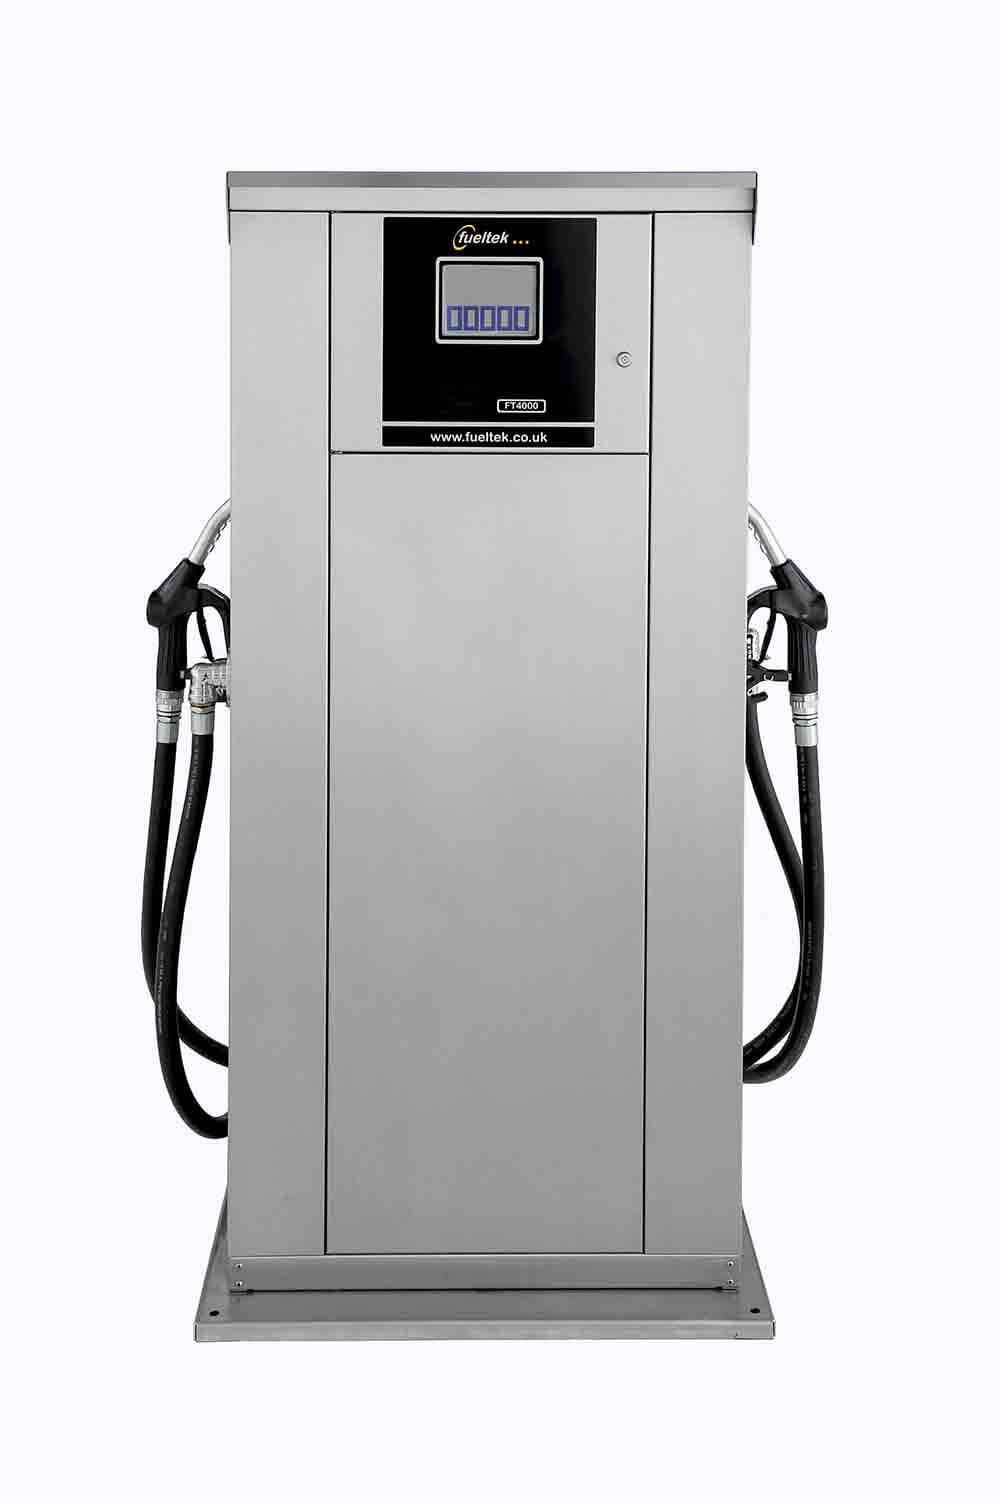 UK Manufactuers of Pulsed Output Fuel Pump